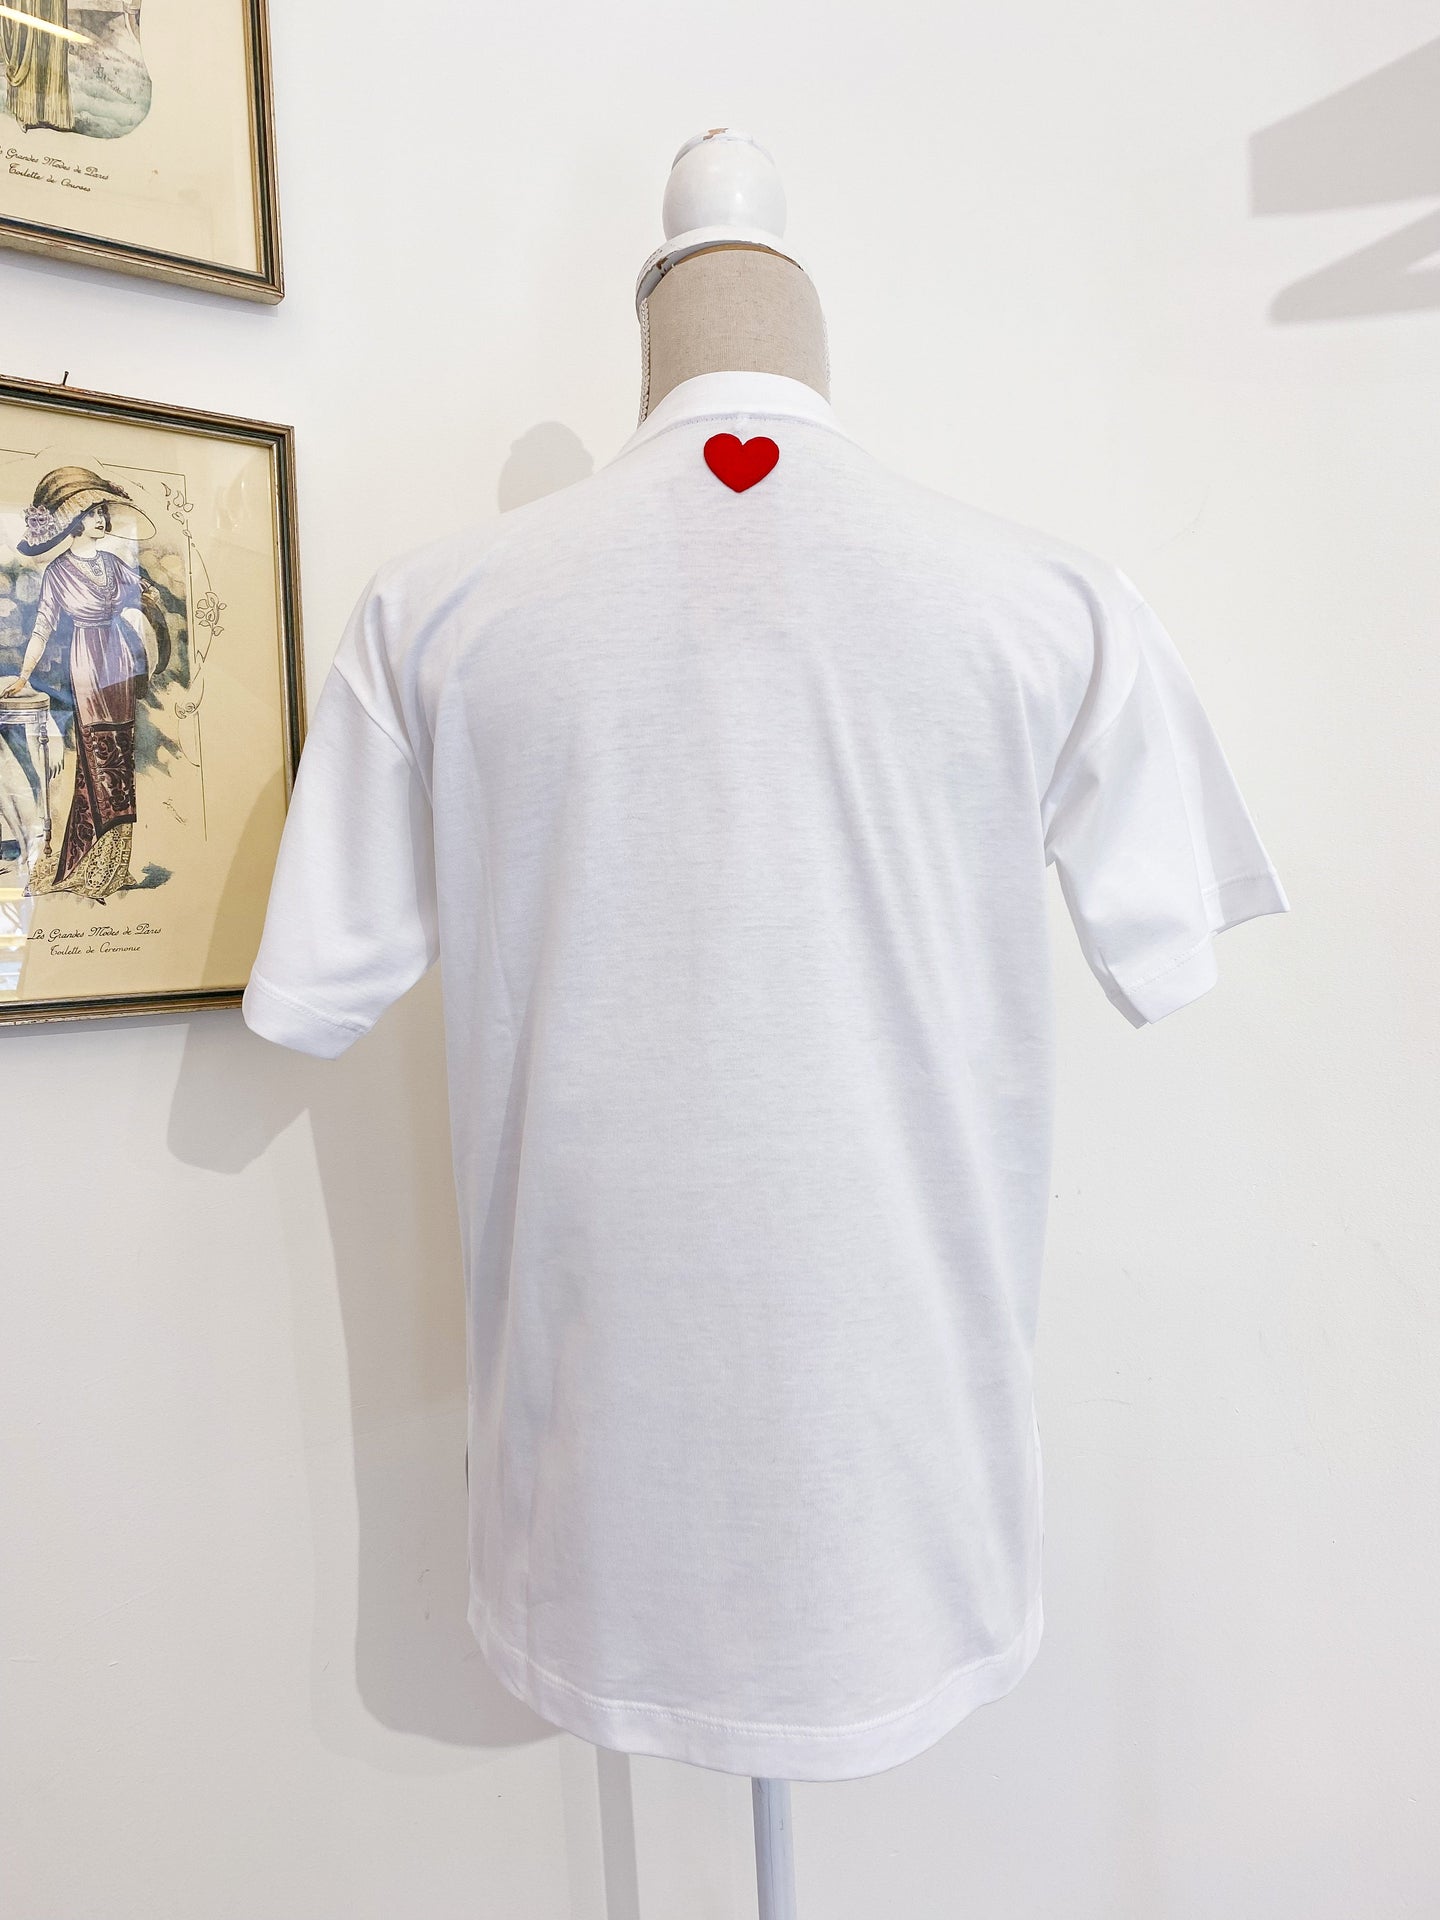 Michela Tshirt - Over- Heart neck embroidery